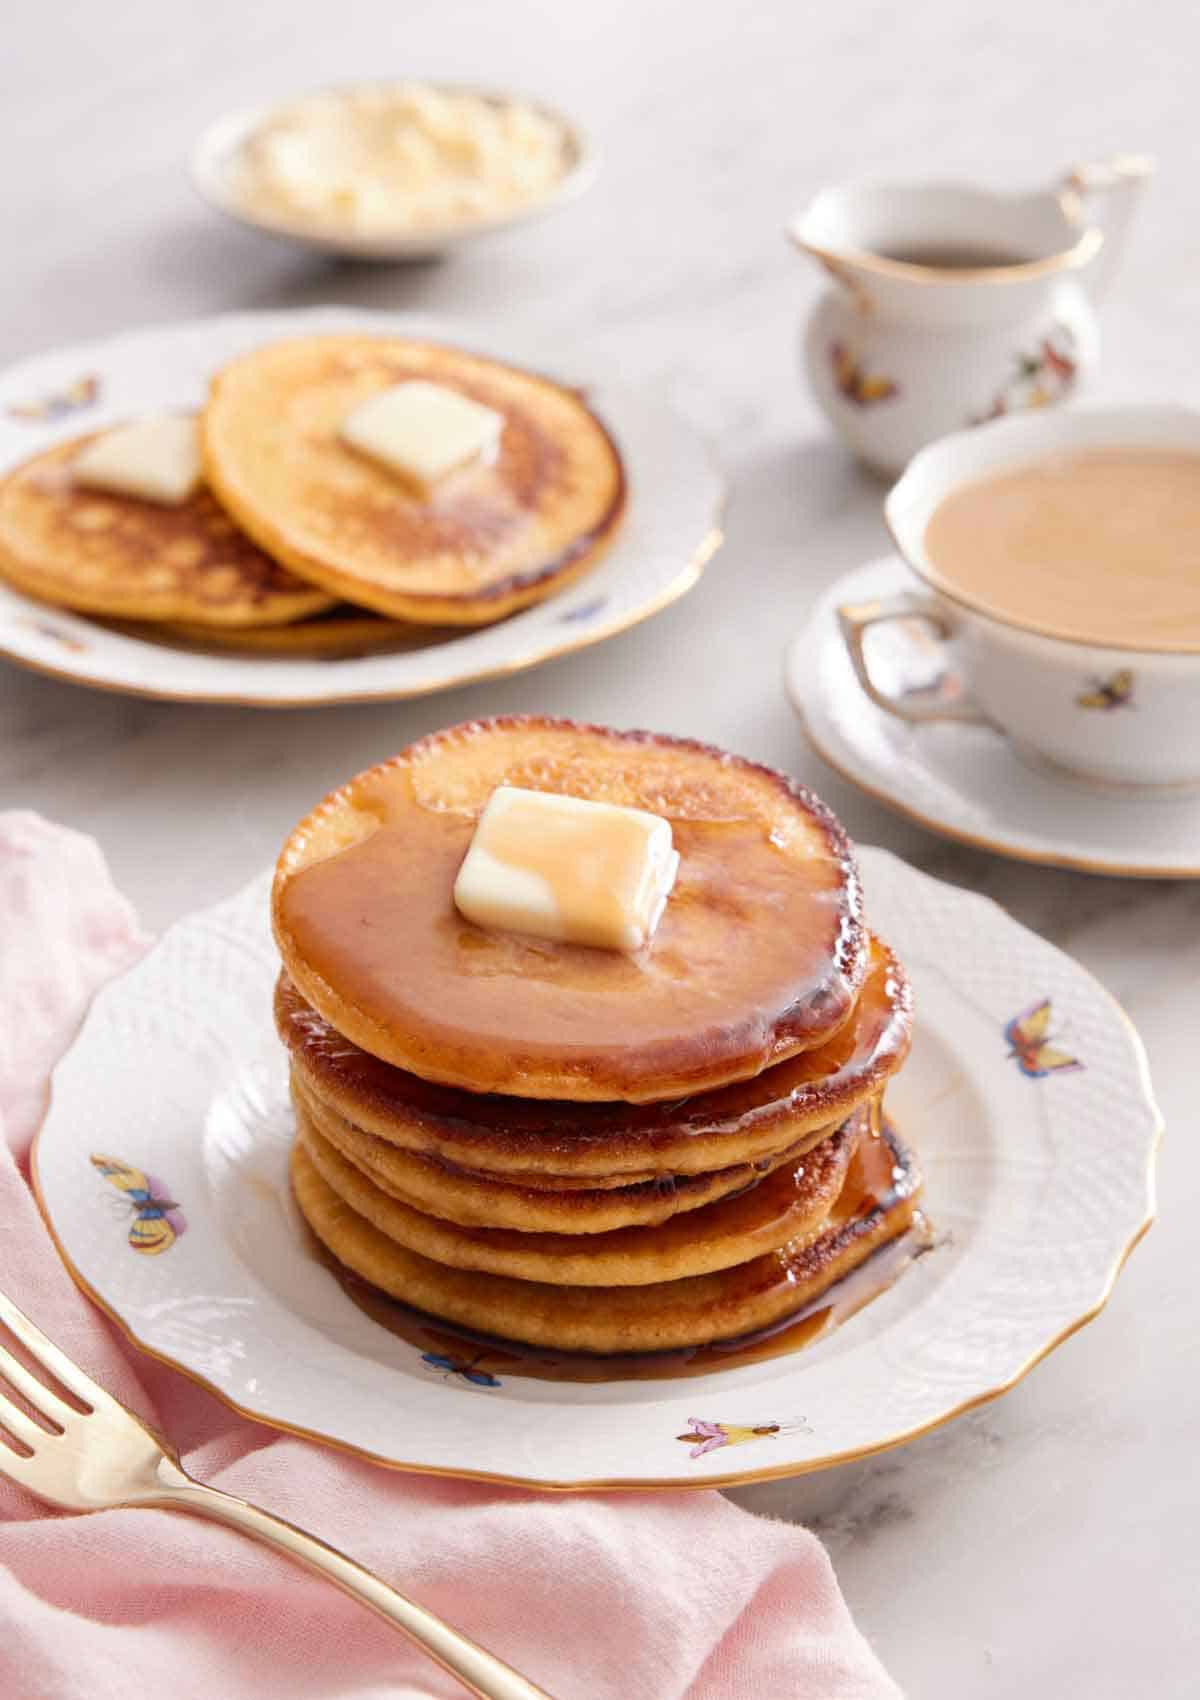 A stack of Johnny cakes with a cup of coffee and another plate with 3 Johnny cakes in the background along with a bowl of butter and syrup.